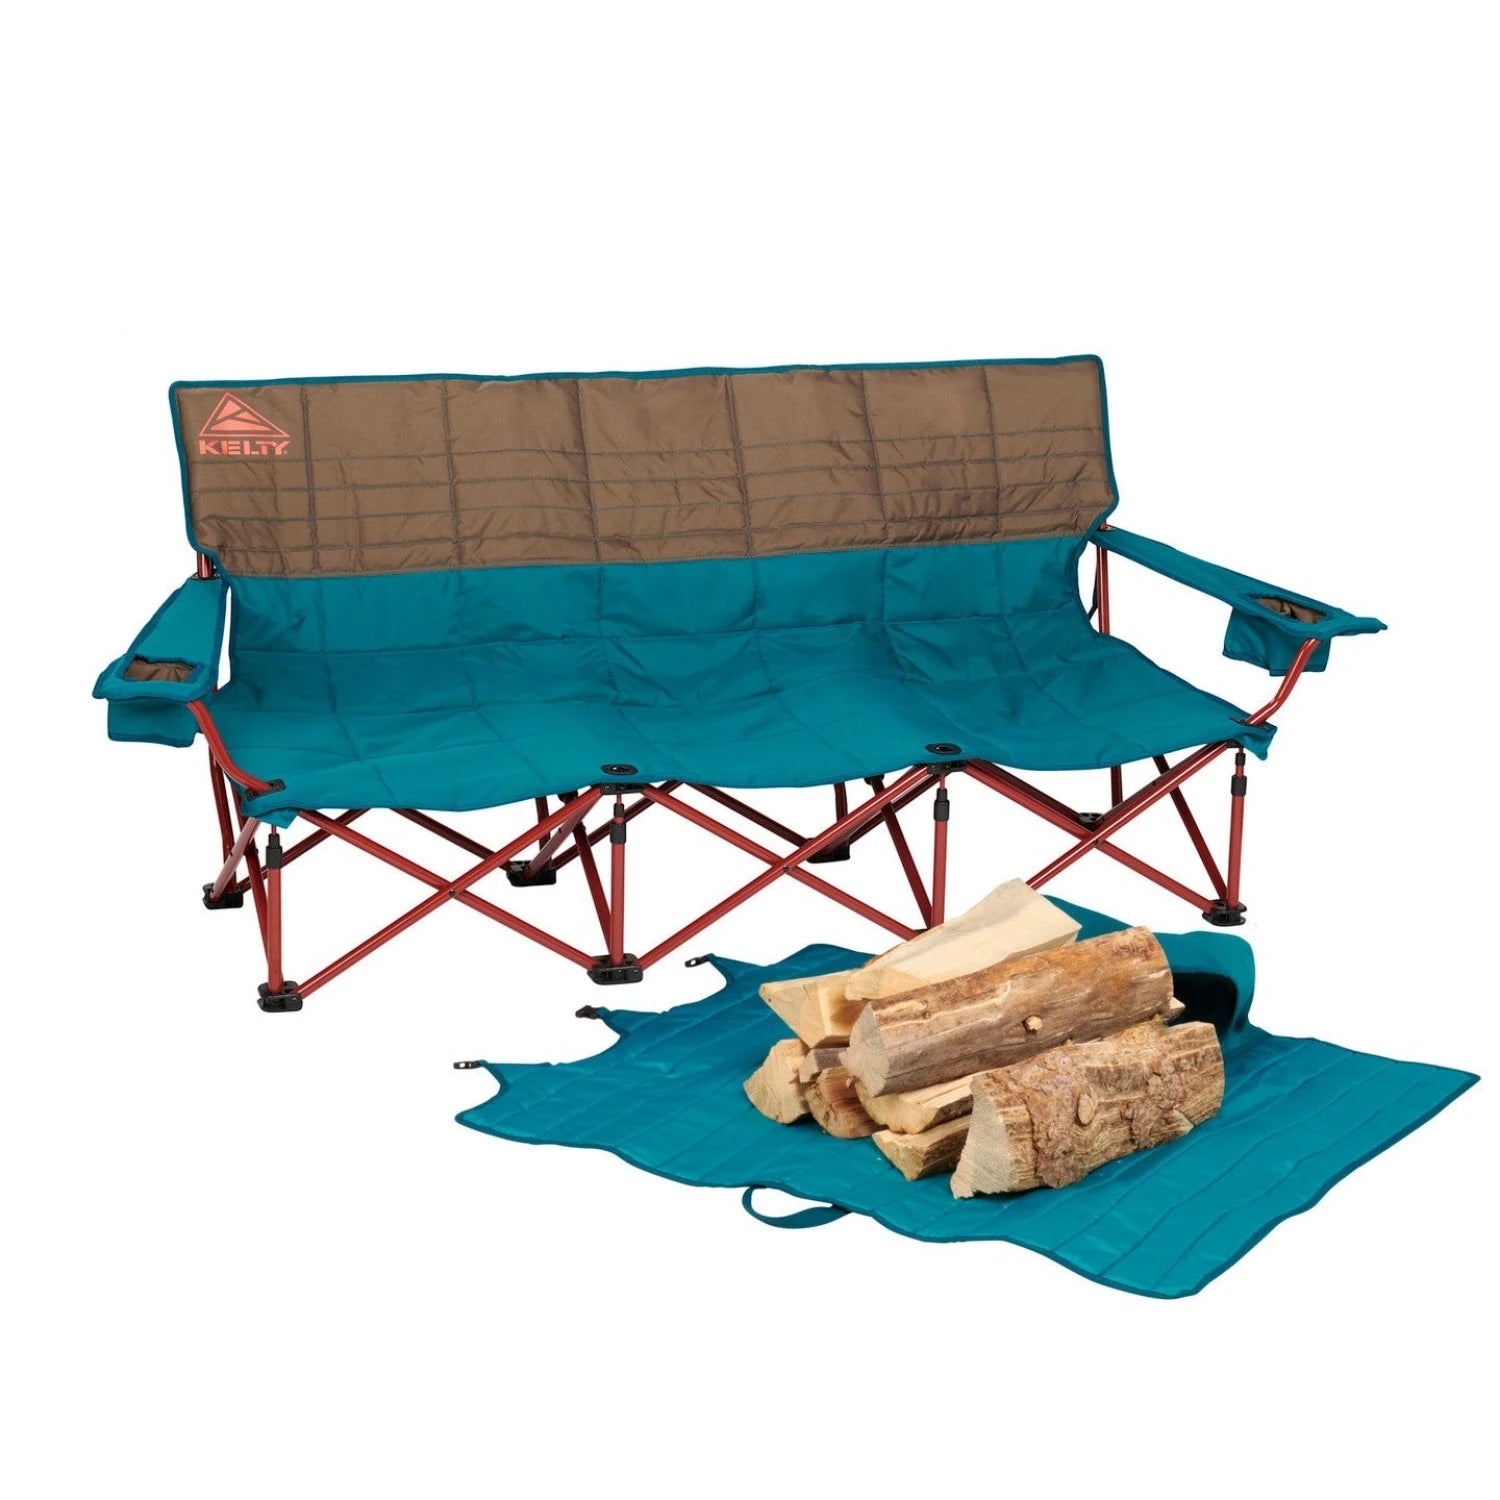 Kelty Lowdown Couch in deep lake & fallen rock front view with logs on open carrier bag